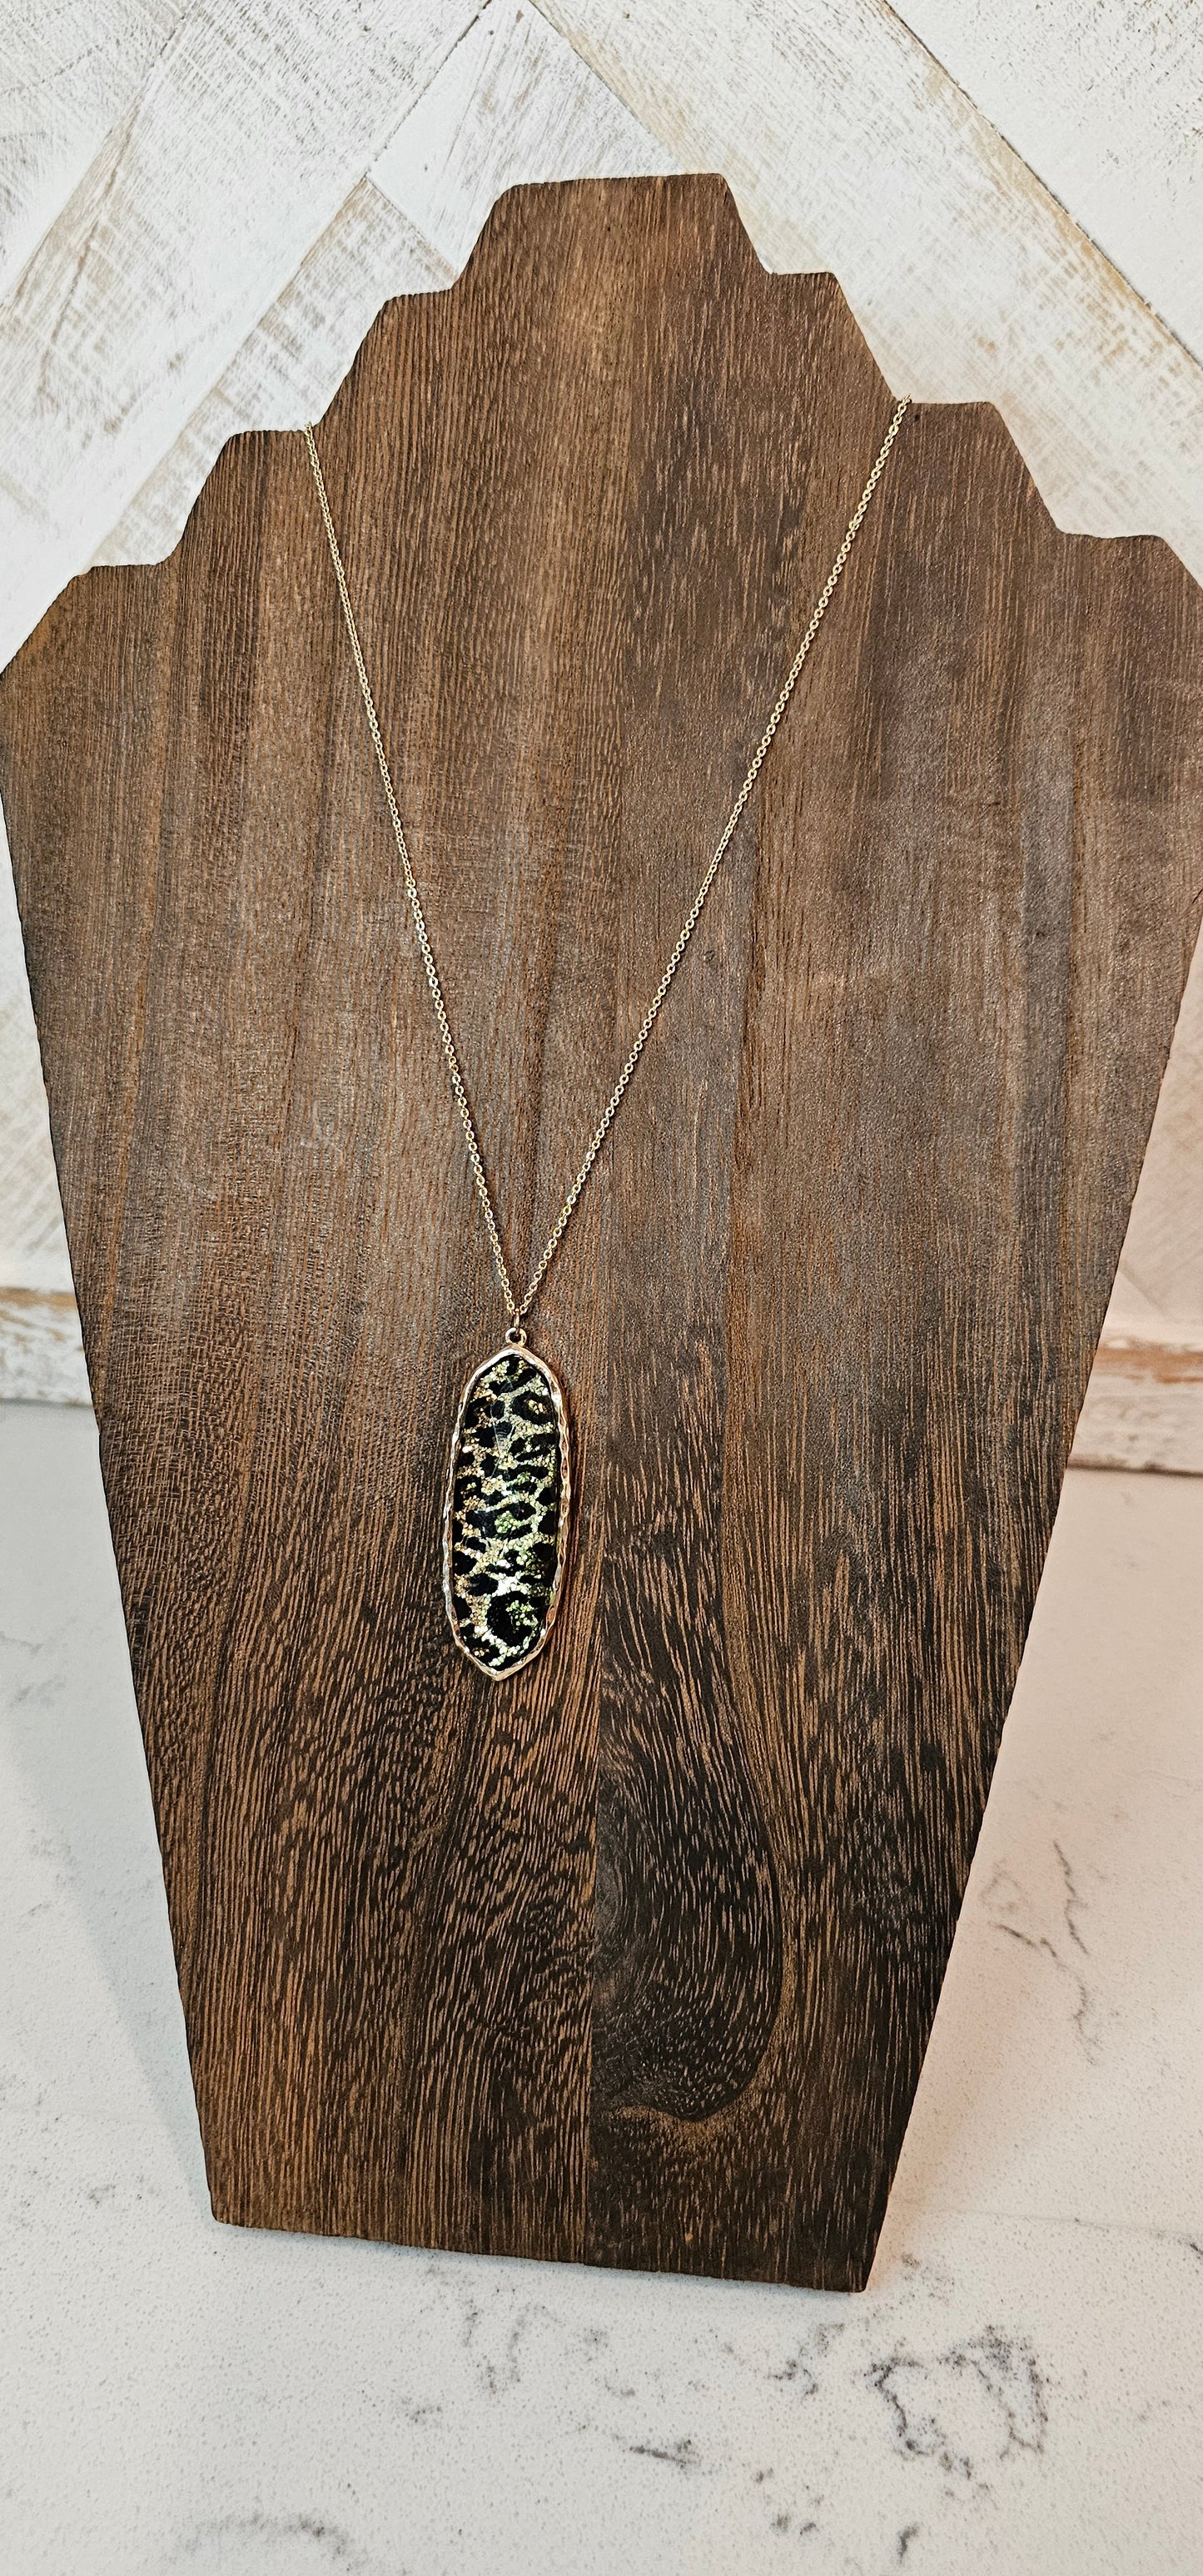 Sparkling gold color necklace with black and brown leopard print pendant. Whether you want to be on the wild side or classy this necklace will add a fun touch to your outfit. Length of chain is adjustable to 28 inches.